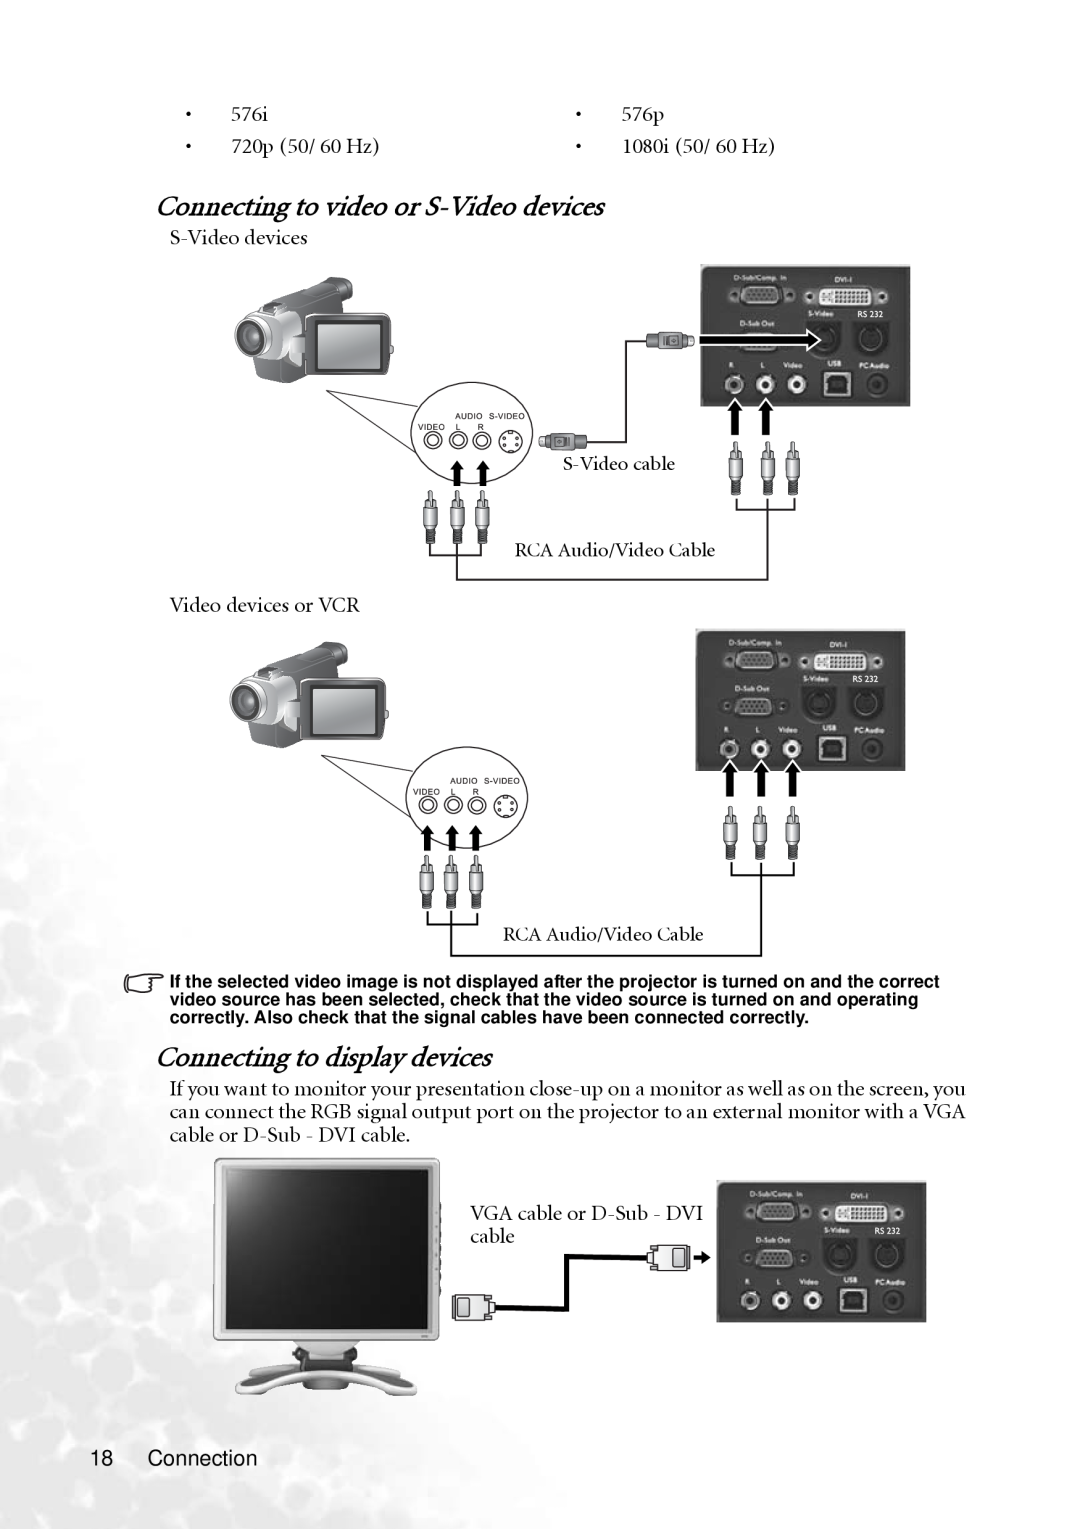 BenQ PB8260 user manual Connecting to video or S-Video devices, Connecting to display devices 